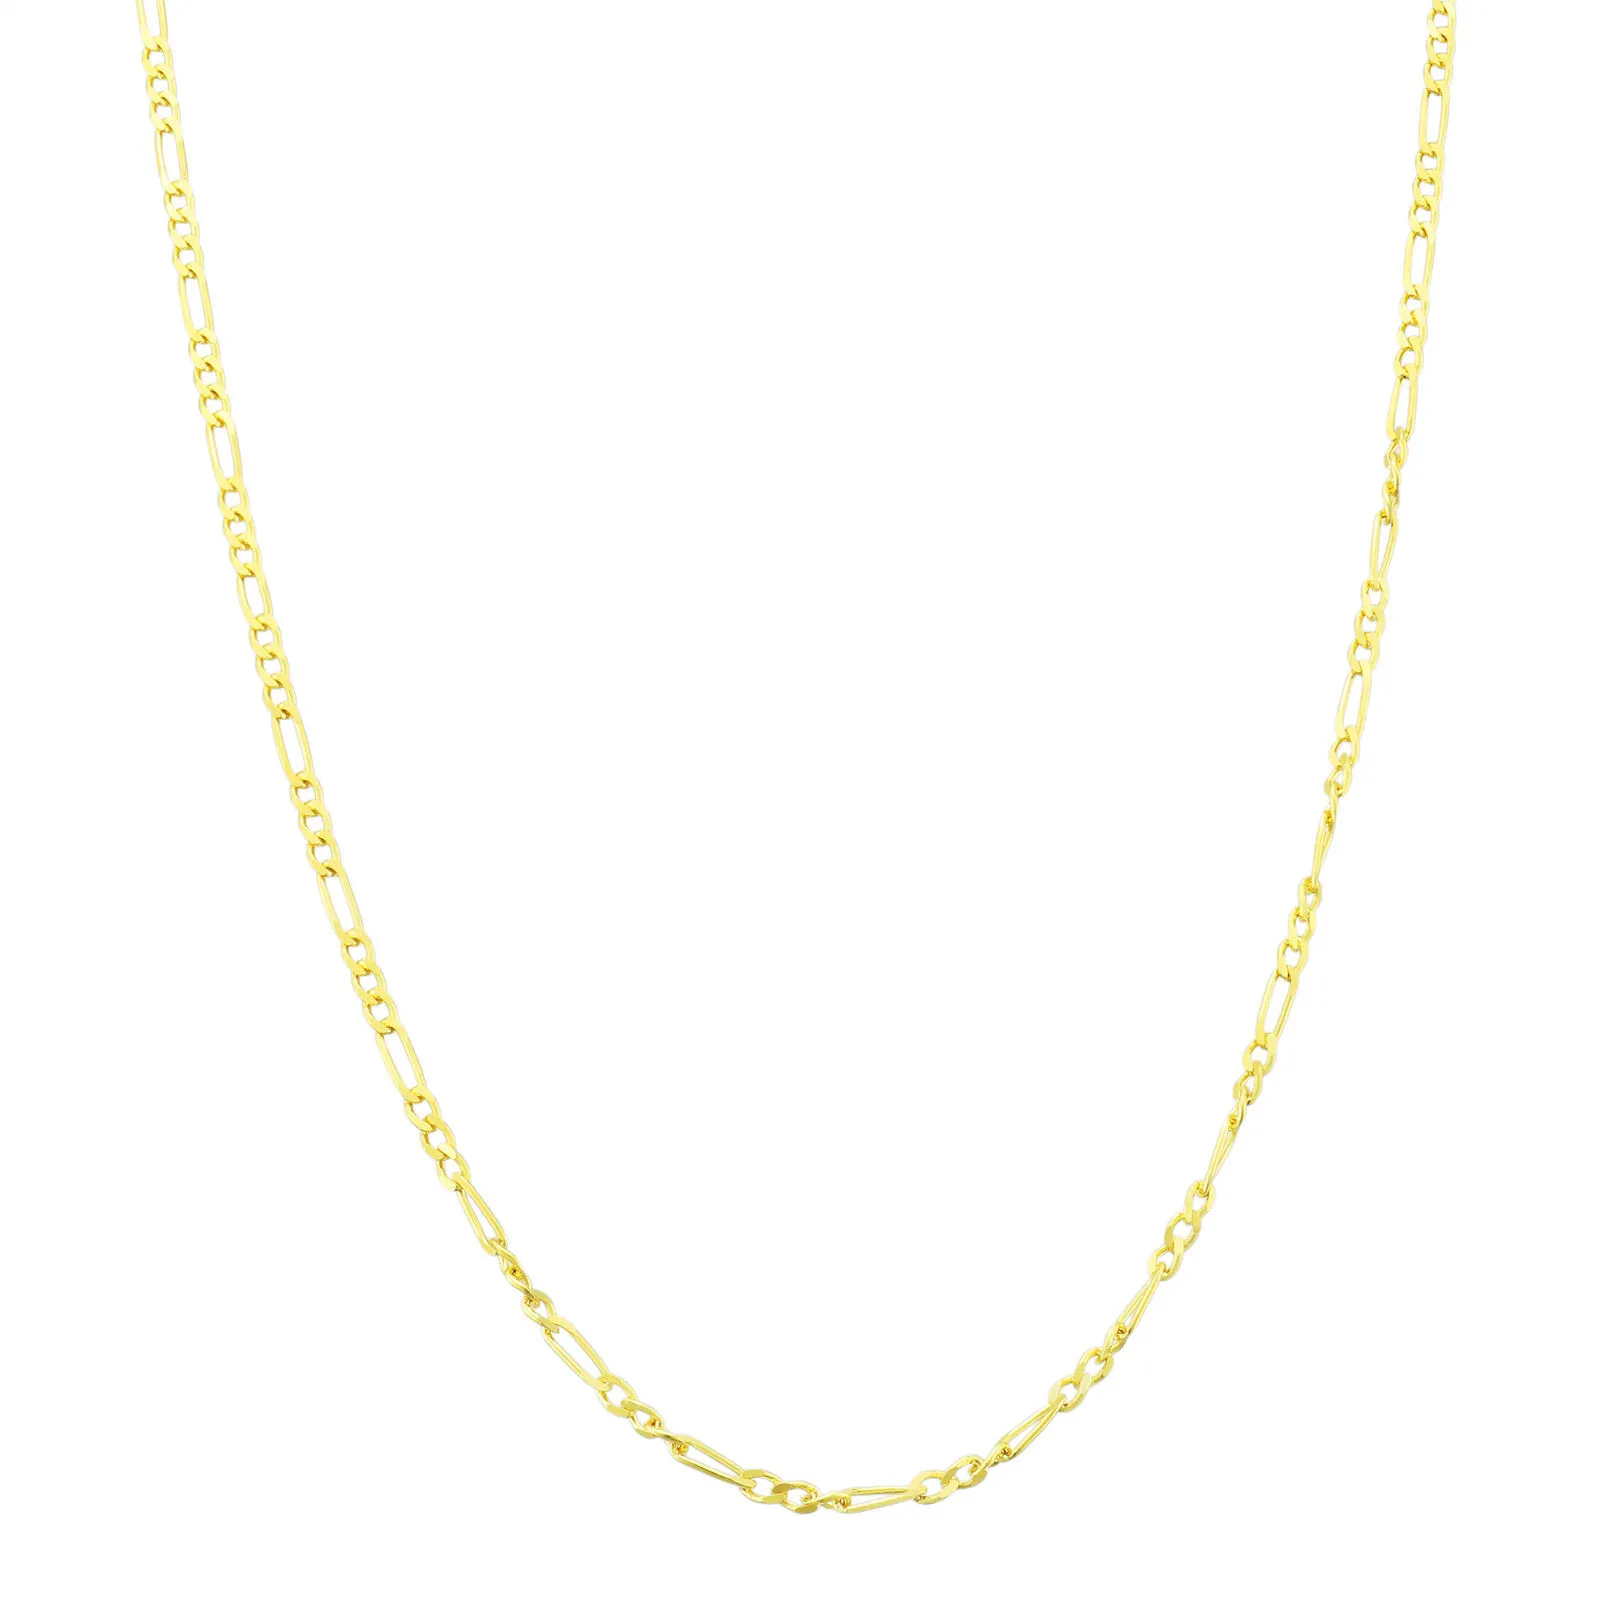 14K Yellow Gold Solid 2mm Thin Women's Figaro Chain Link Necklace 18 234s